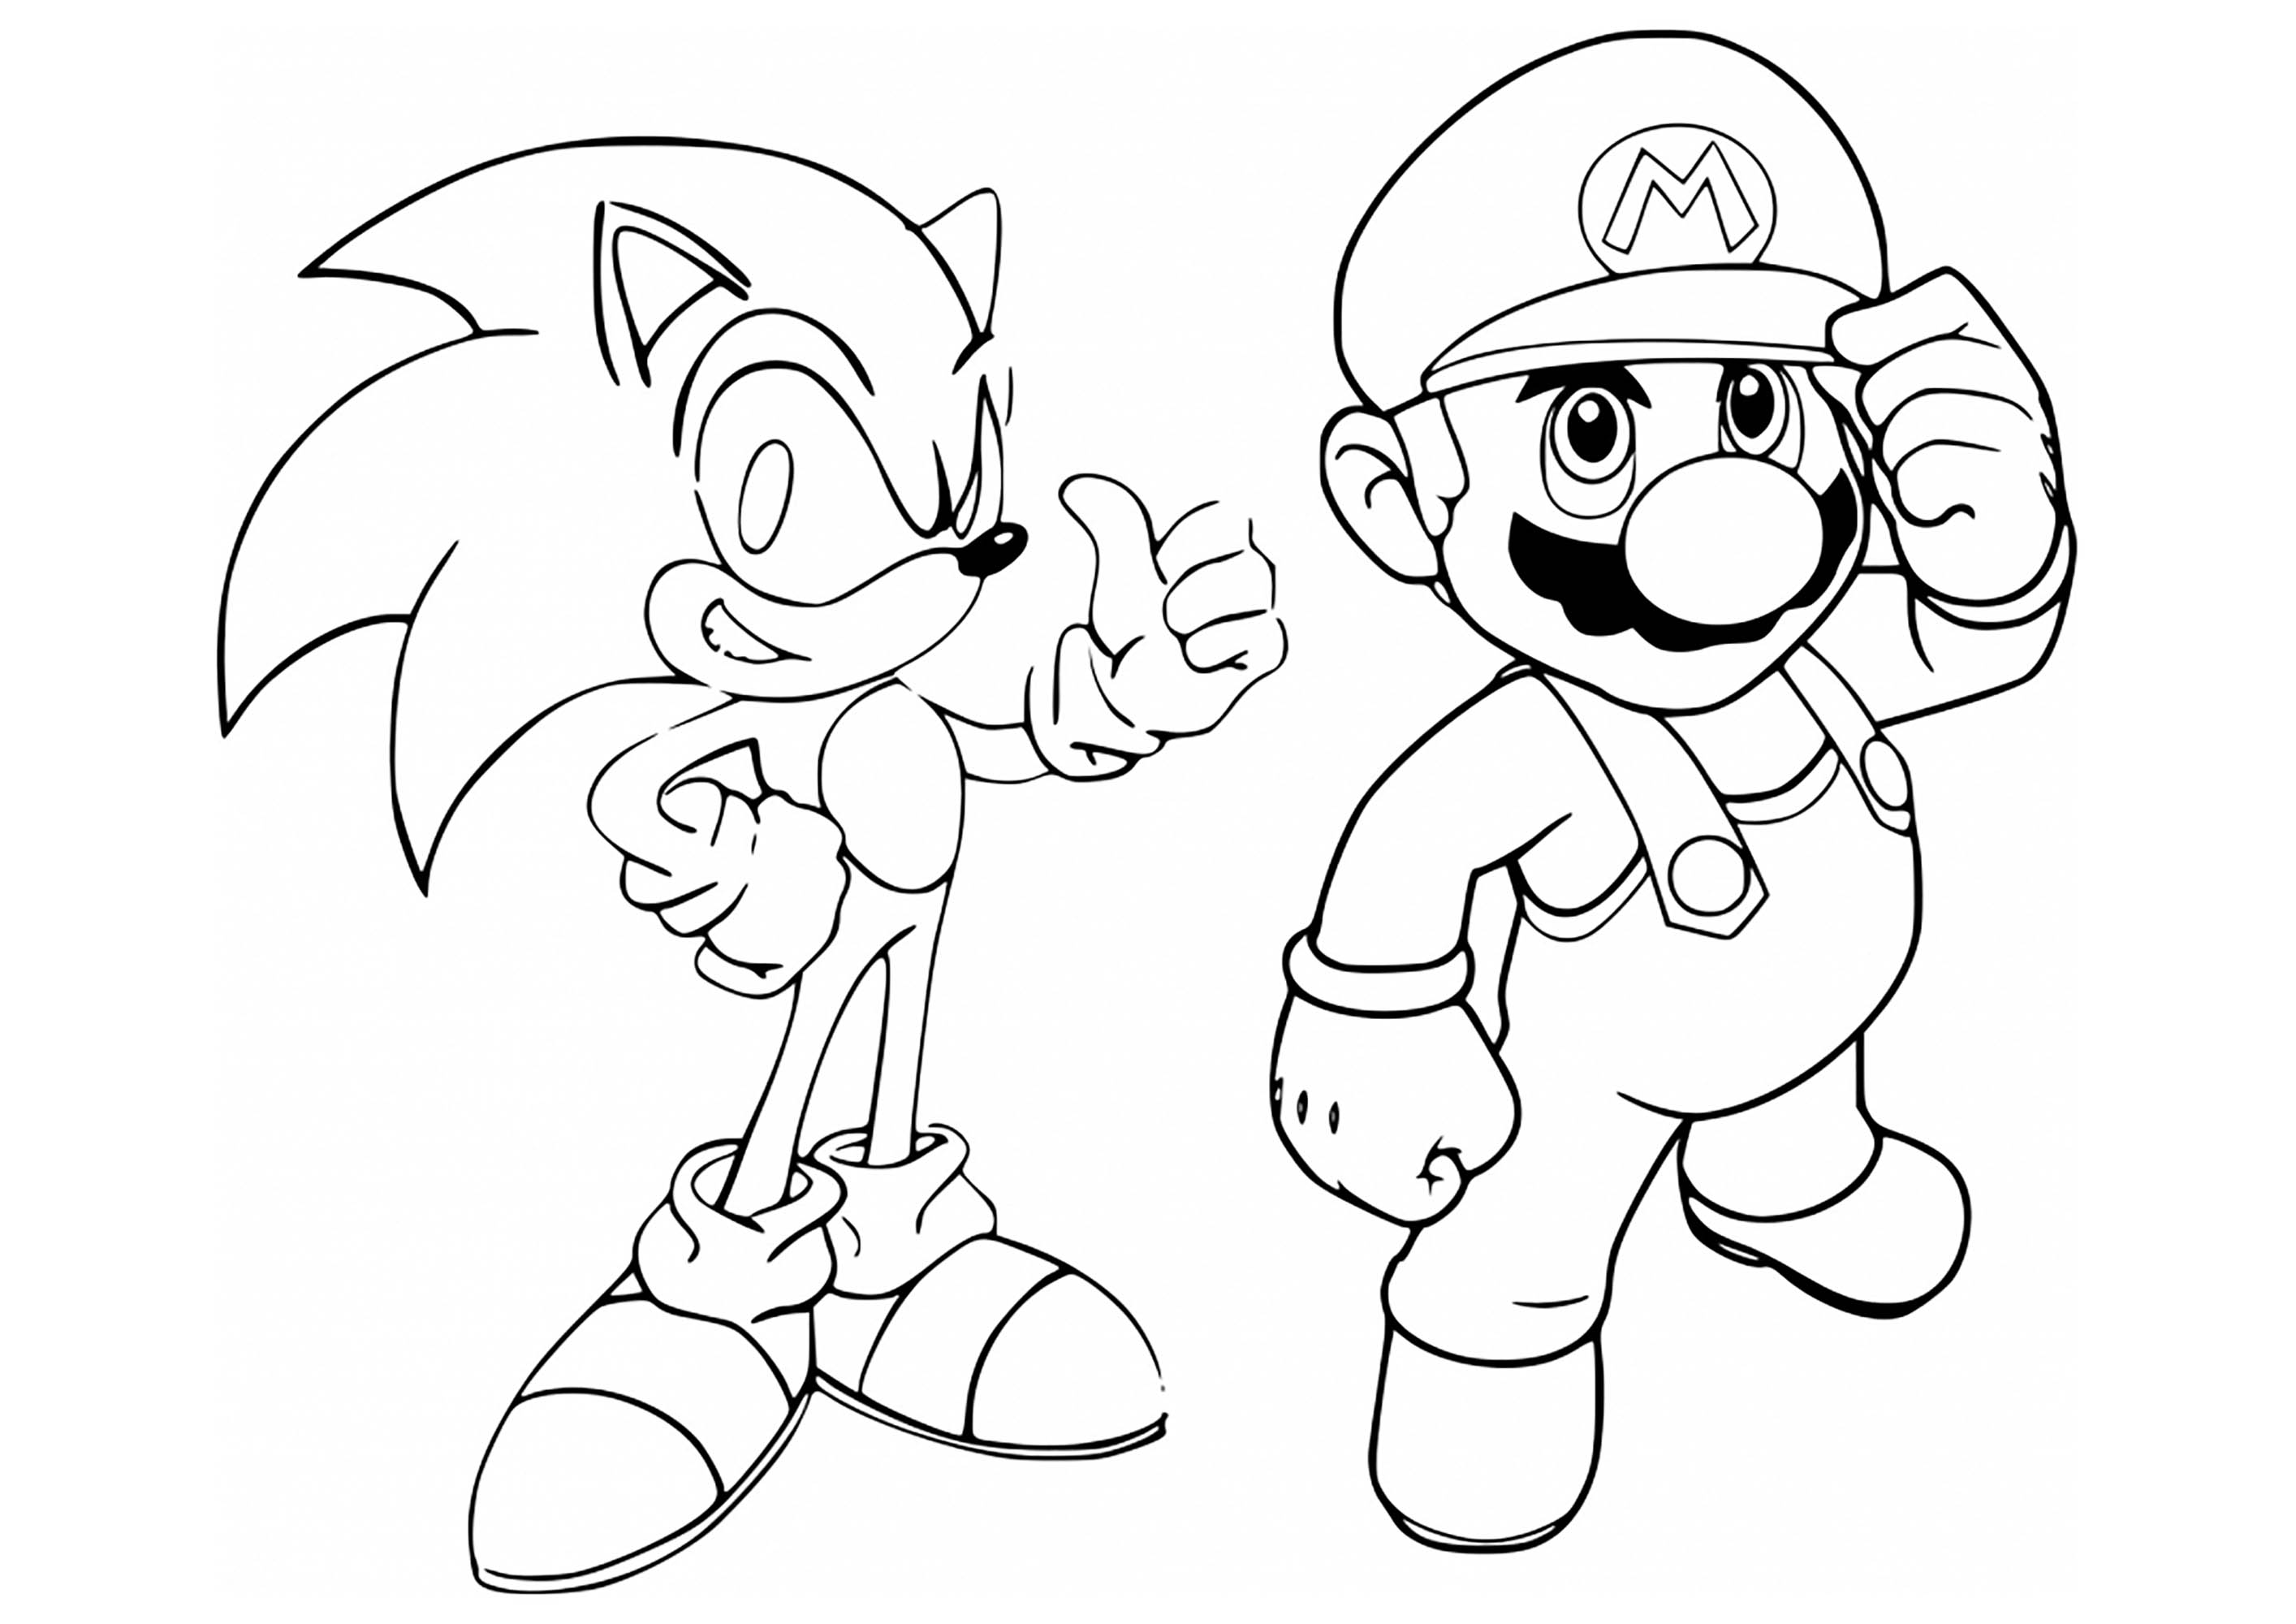 Mario Coloring Pages for Children